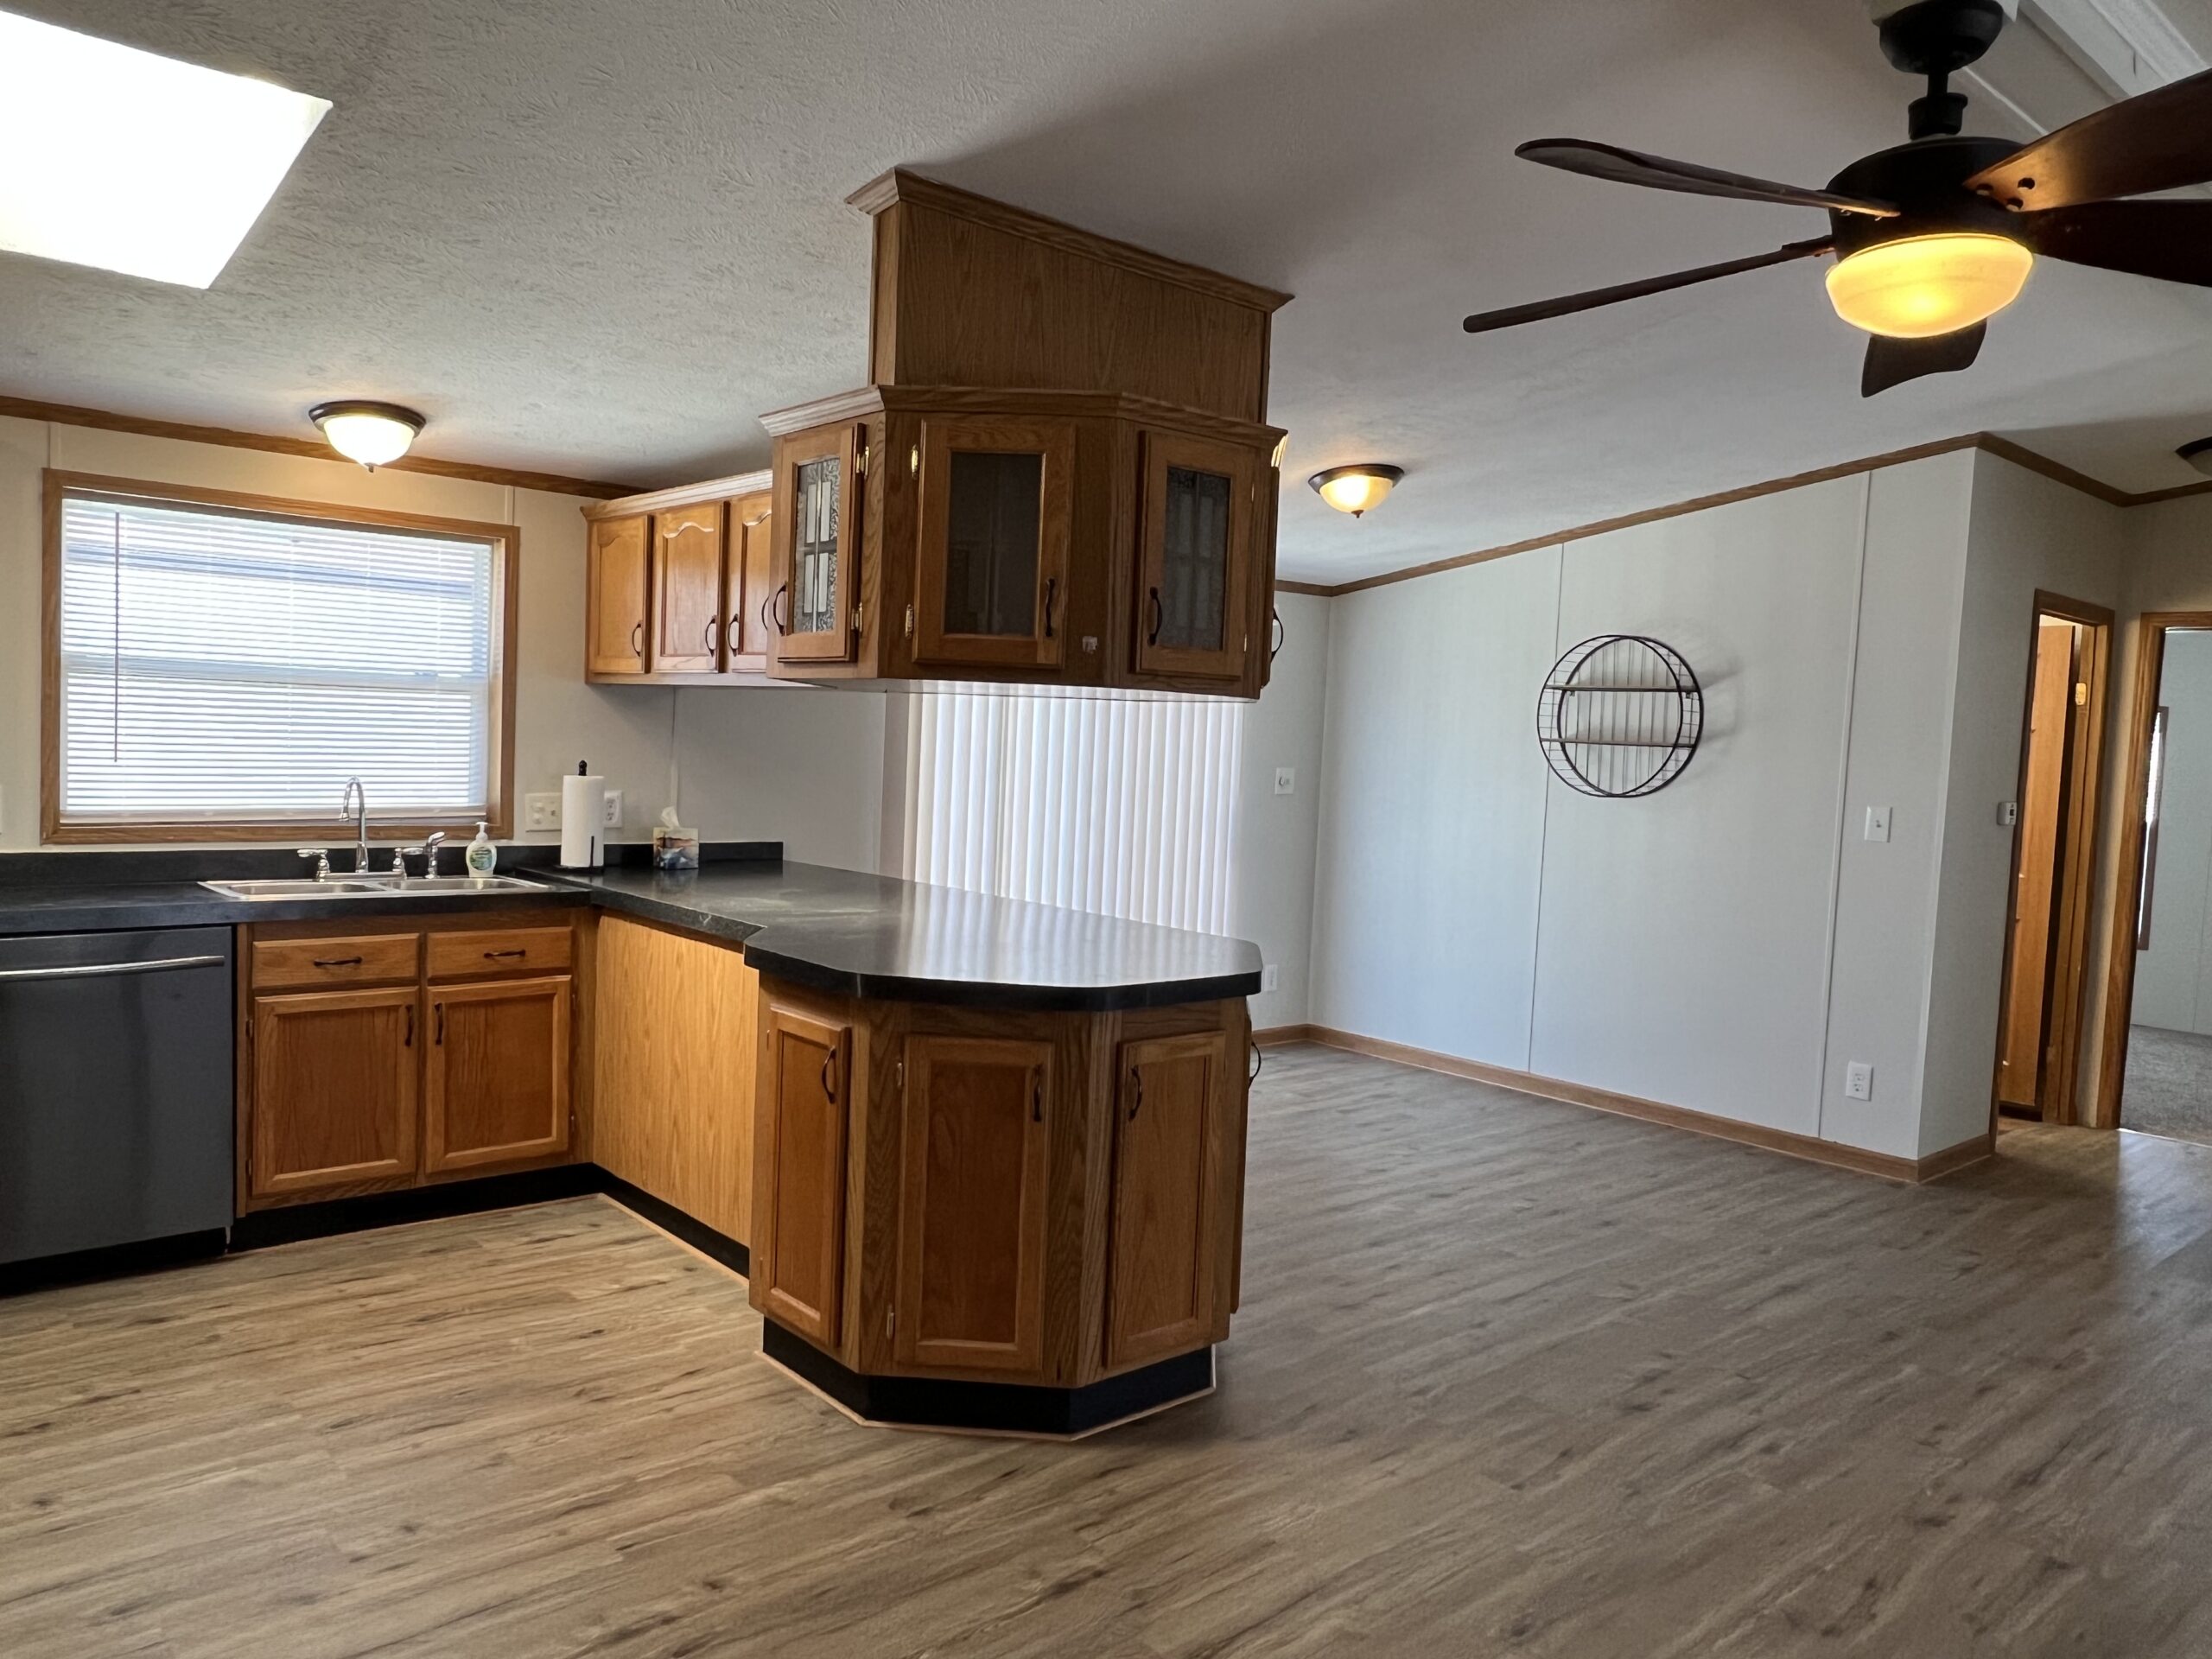 NEWLY REMODELED HOME – UPGRADED AMENITIES